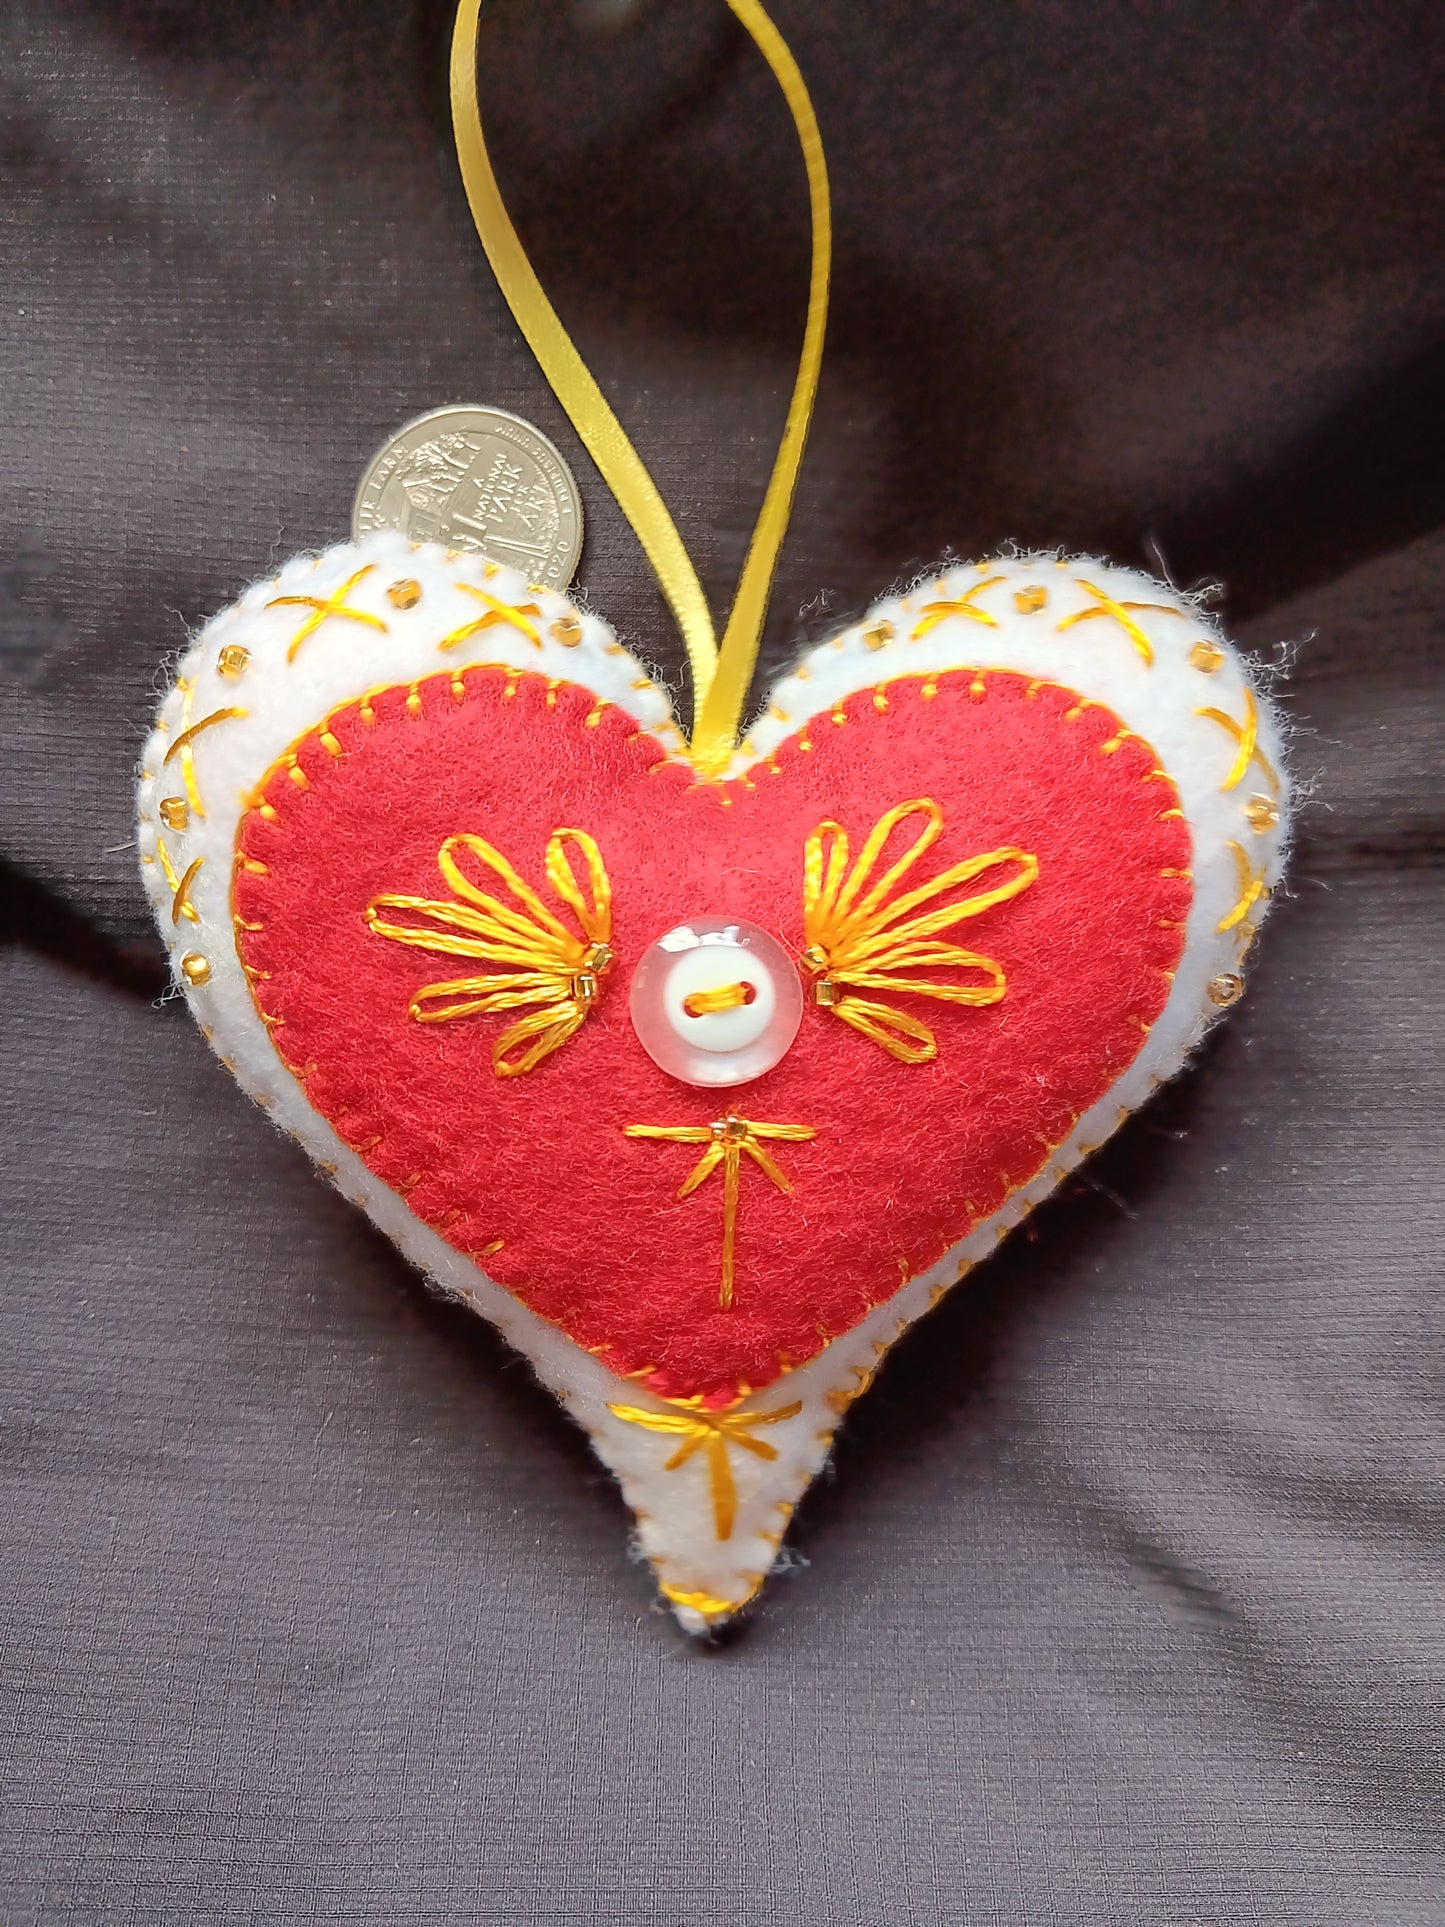 White and Red Felt Heart Ornament